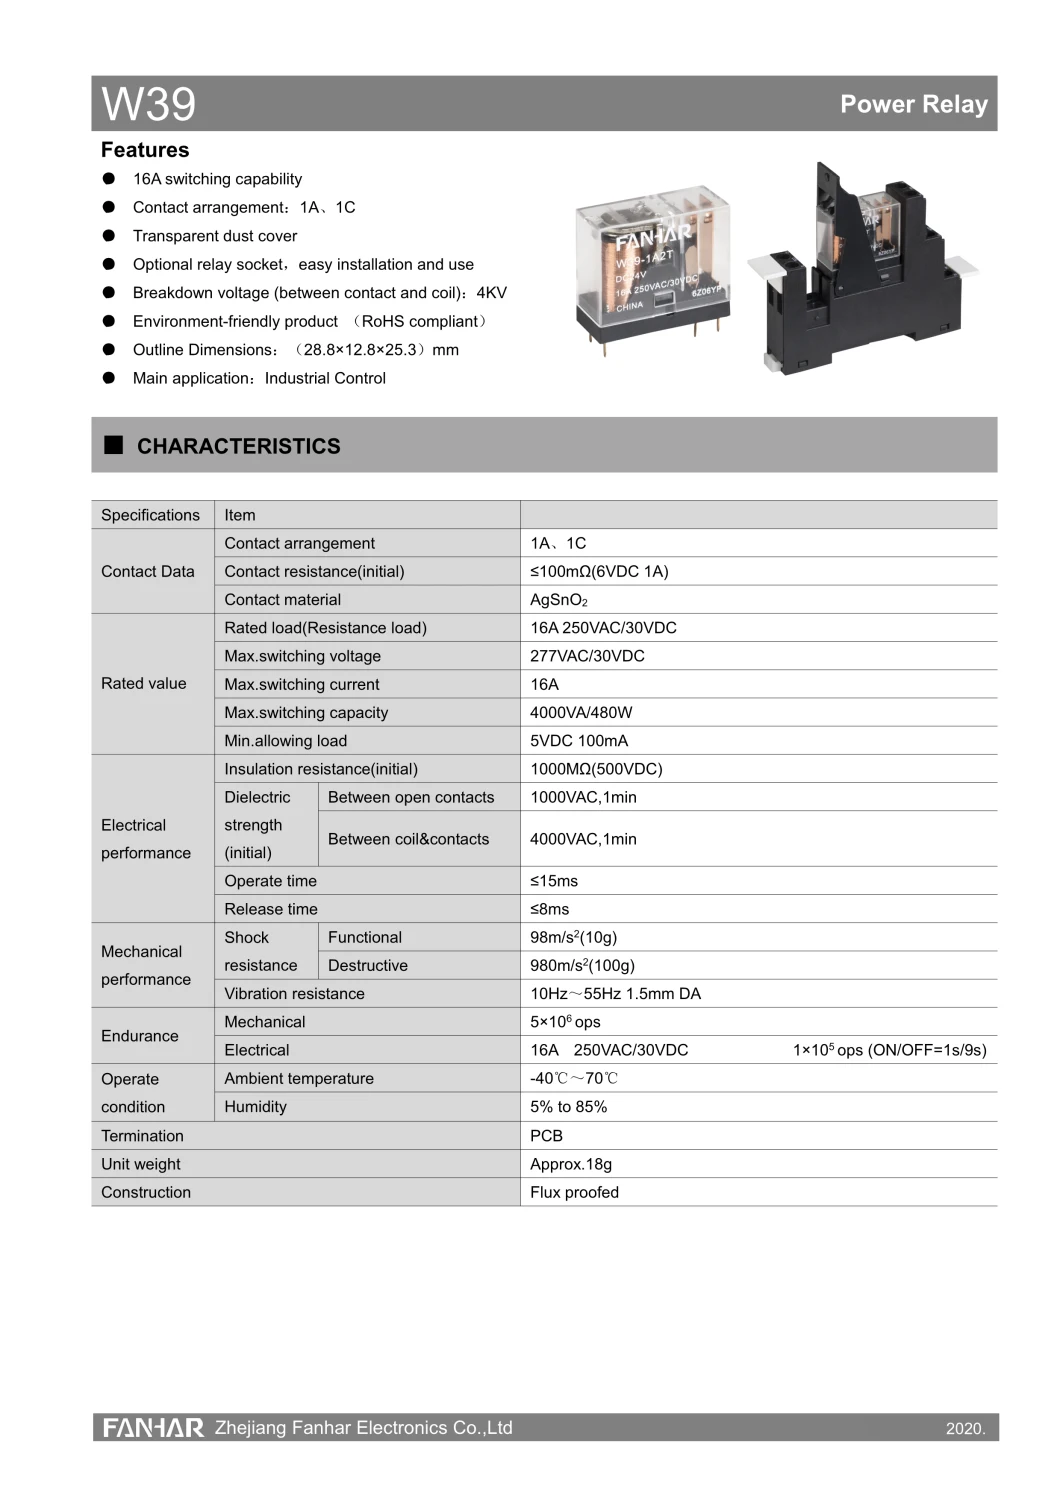 Agsno2 Contact Material Relay for Intelligent Control